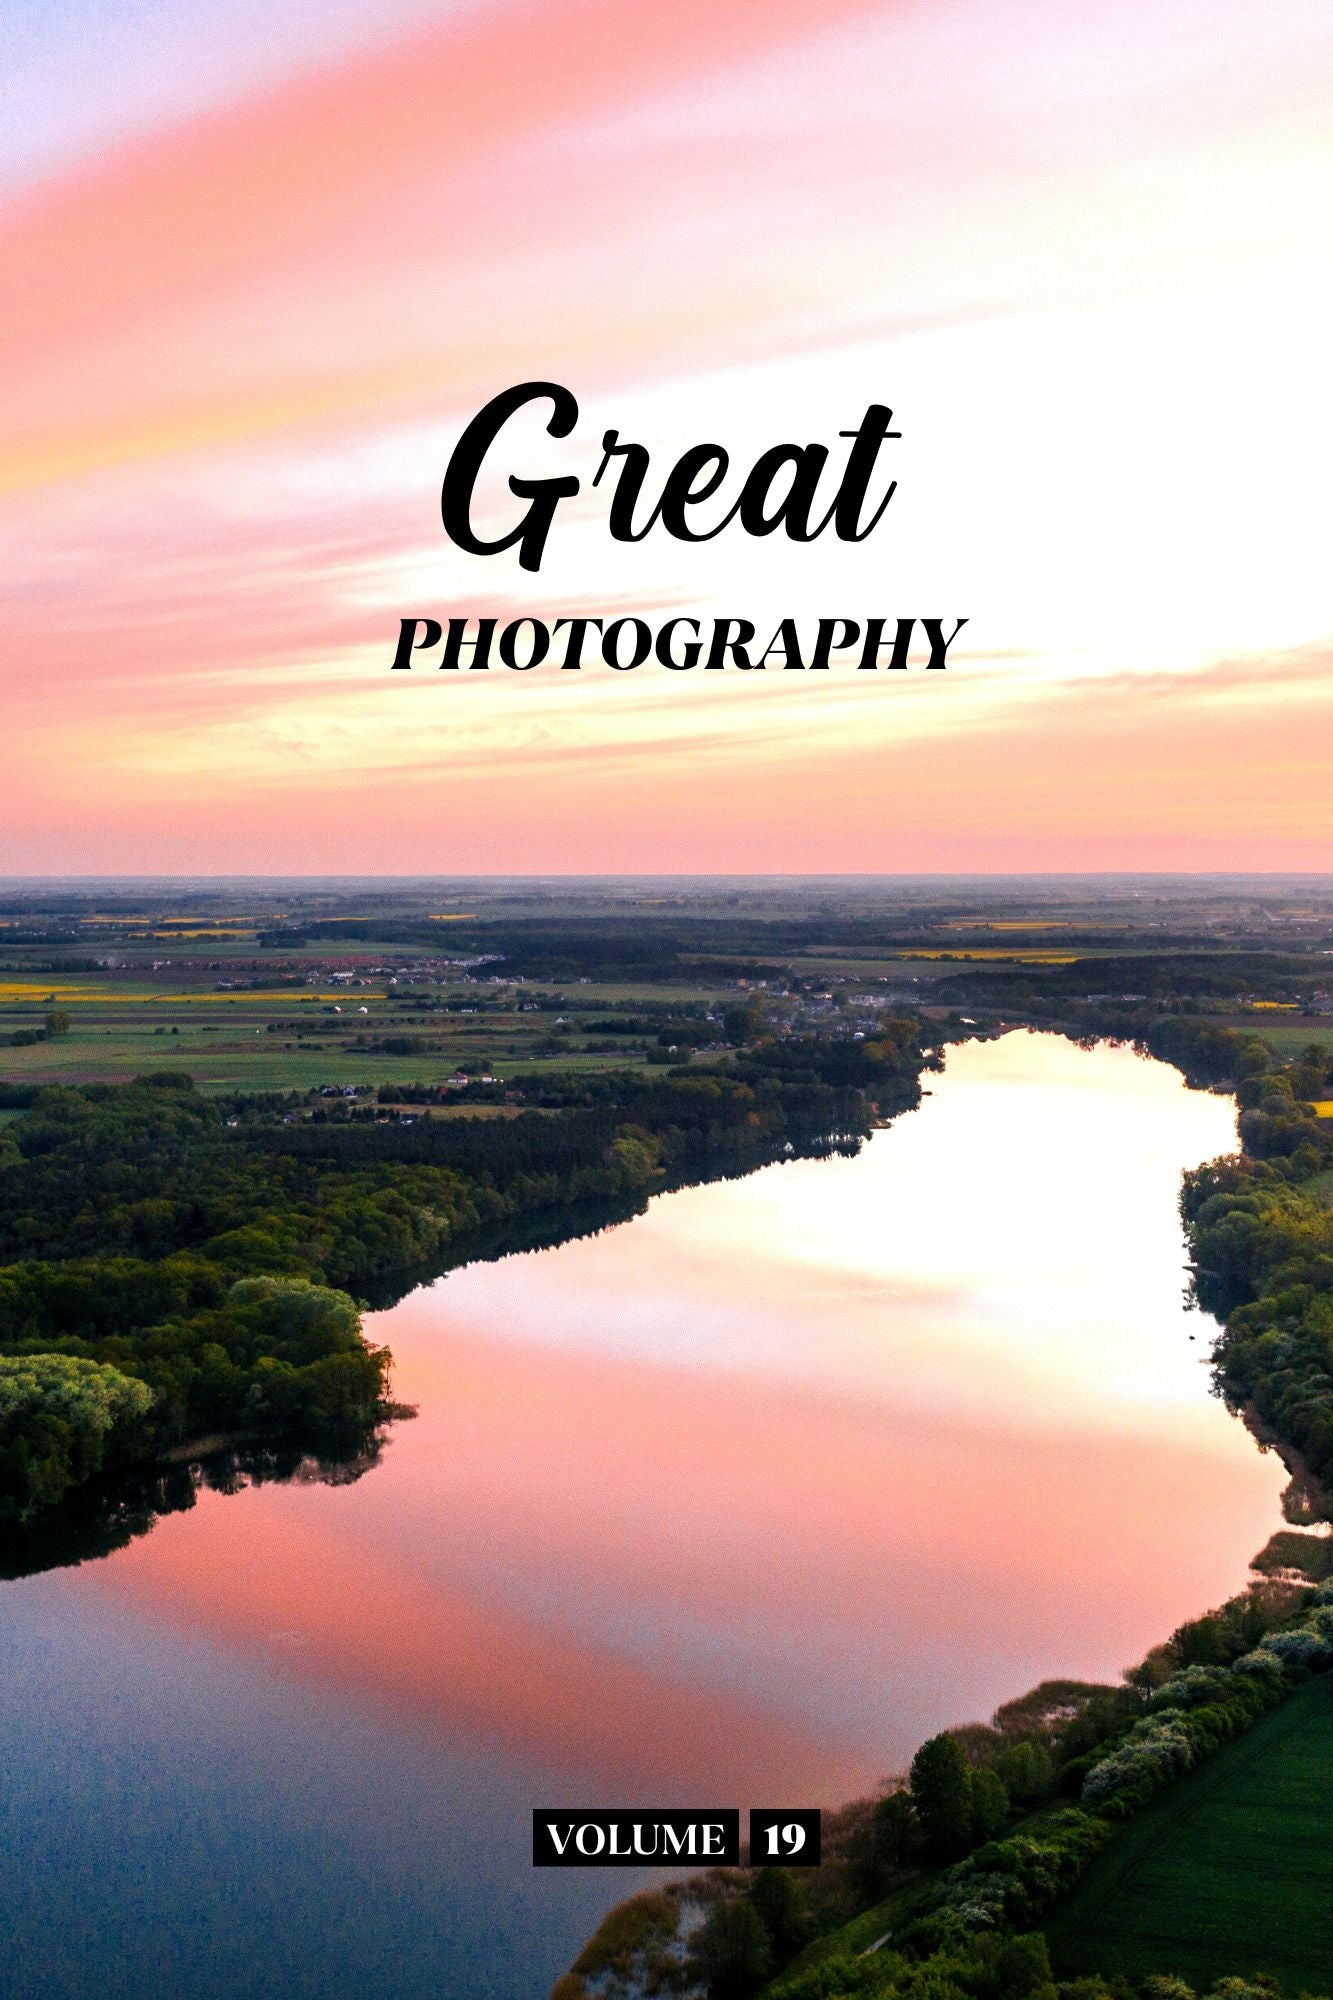 Great Photography Volume 19 (Physical Book Pre-Order)